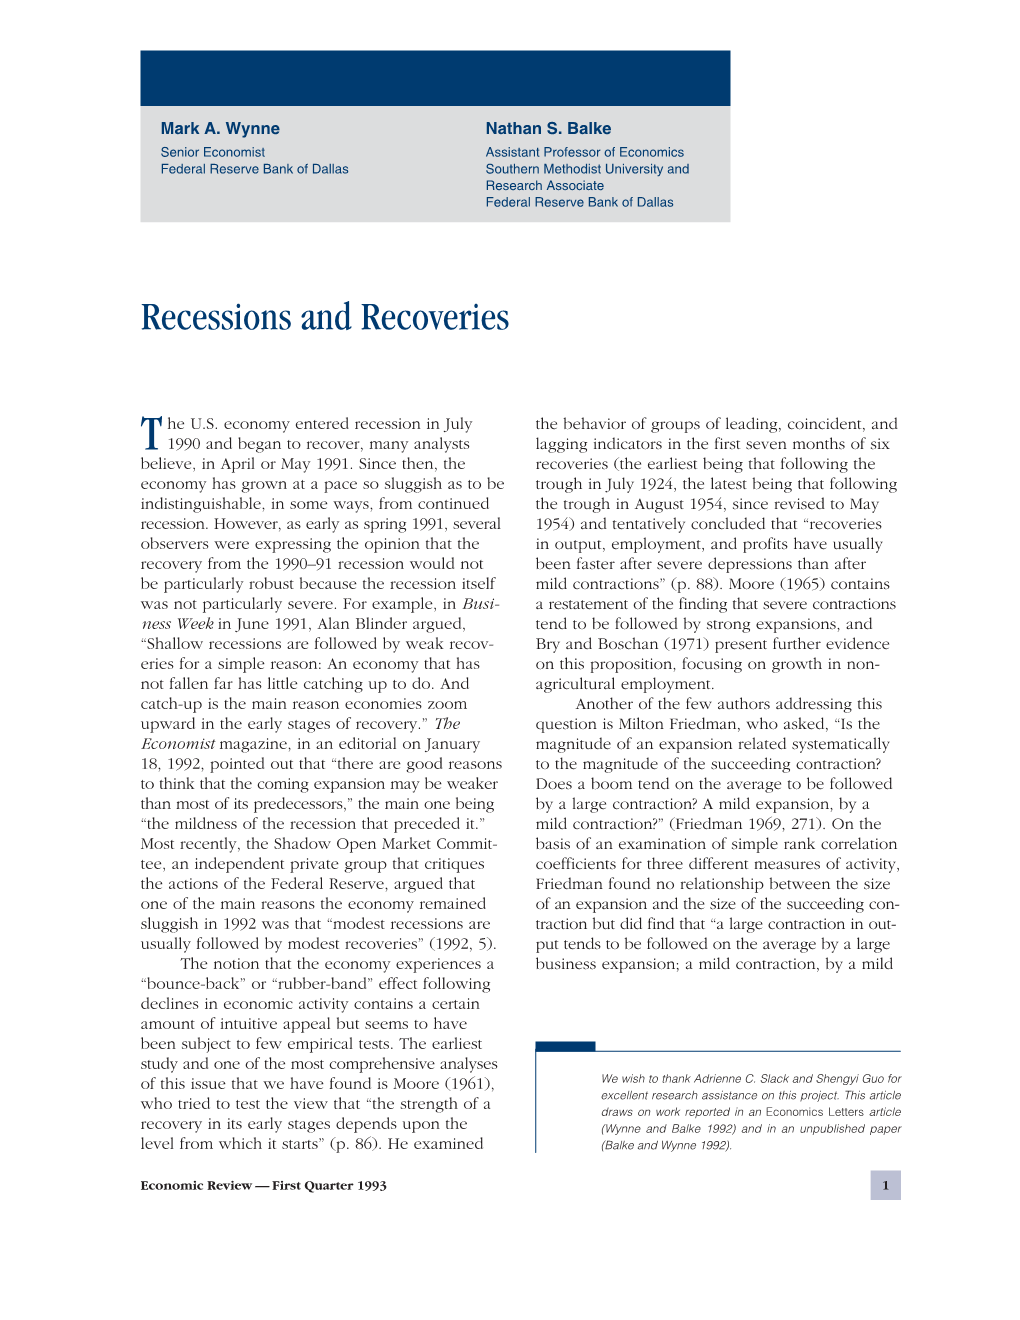 Recessions and Recoveries